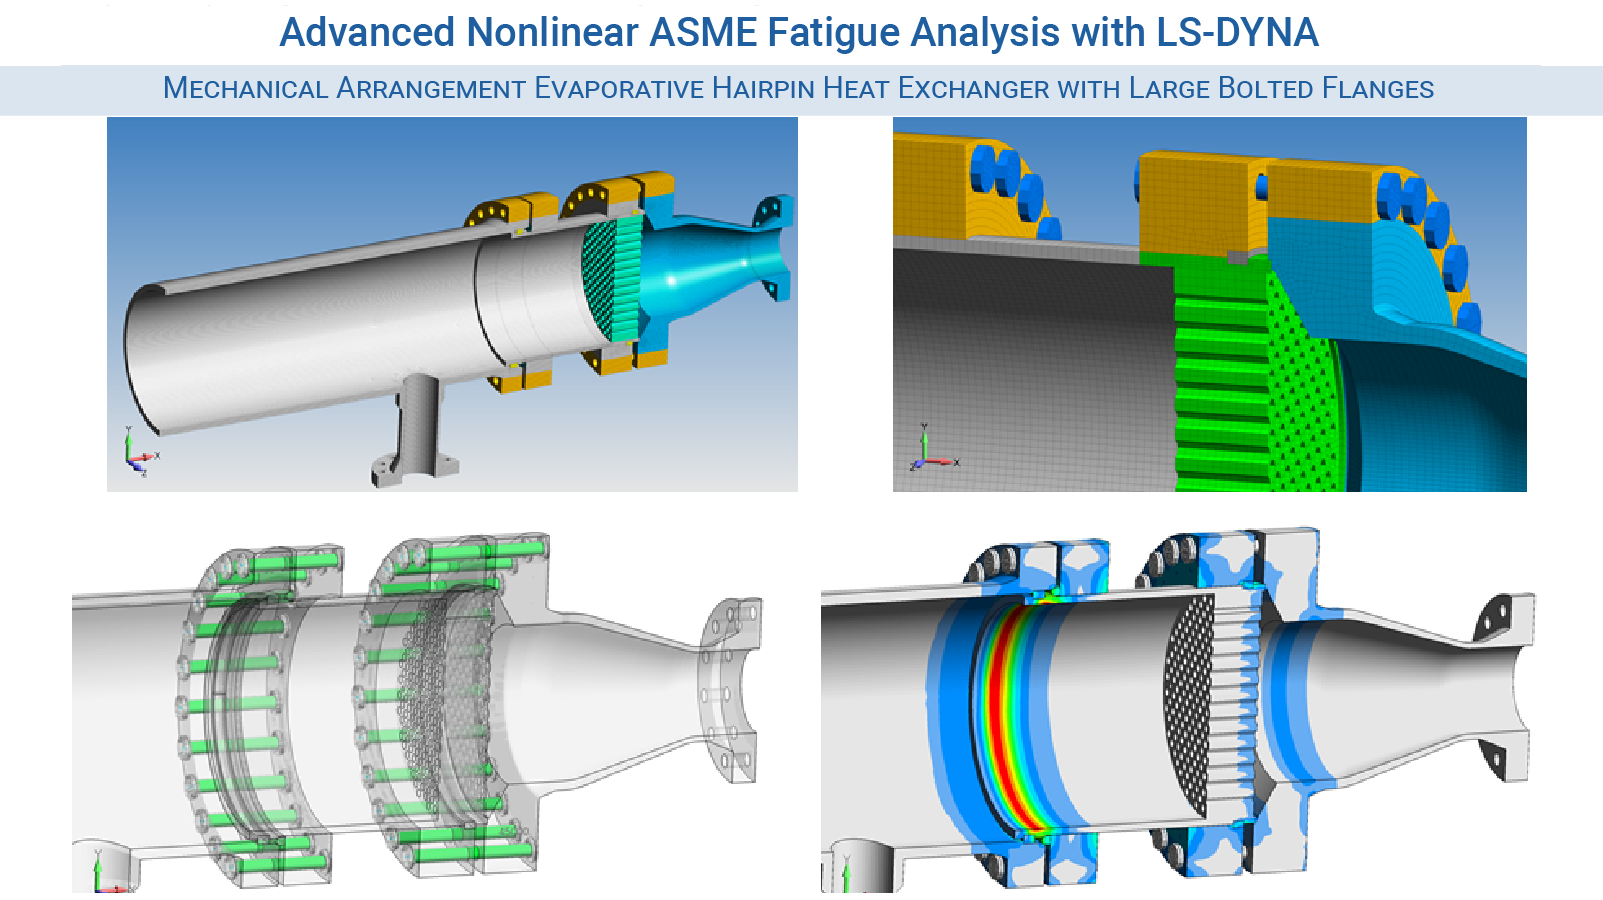 LS-DYNA Consulting Services - Advanced Nonlinear ASME Fatigue Analysis with LS-DYNA  